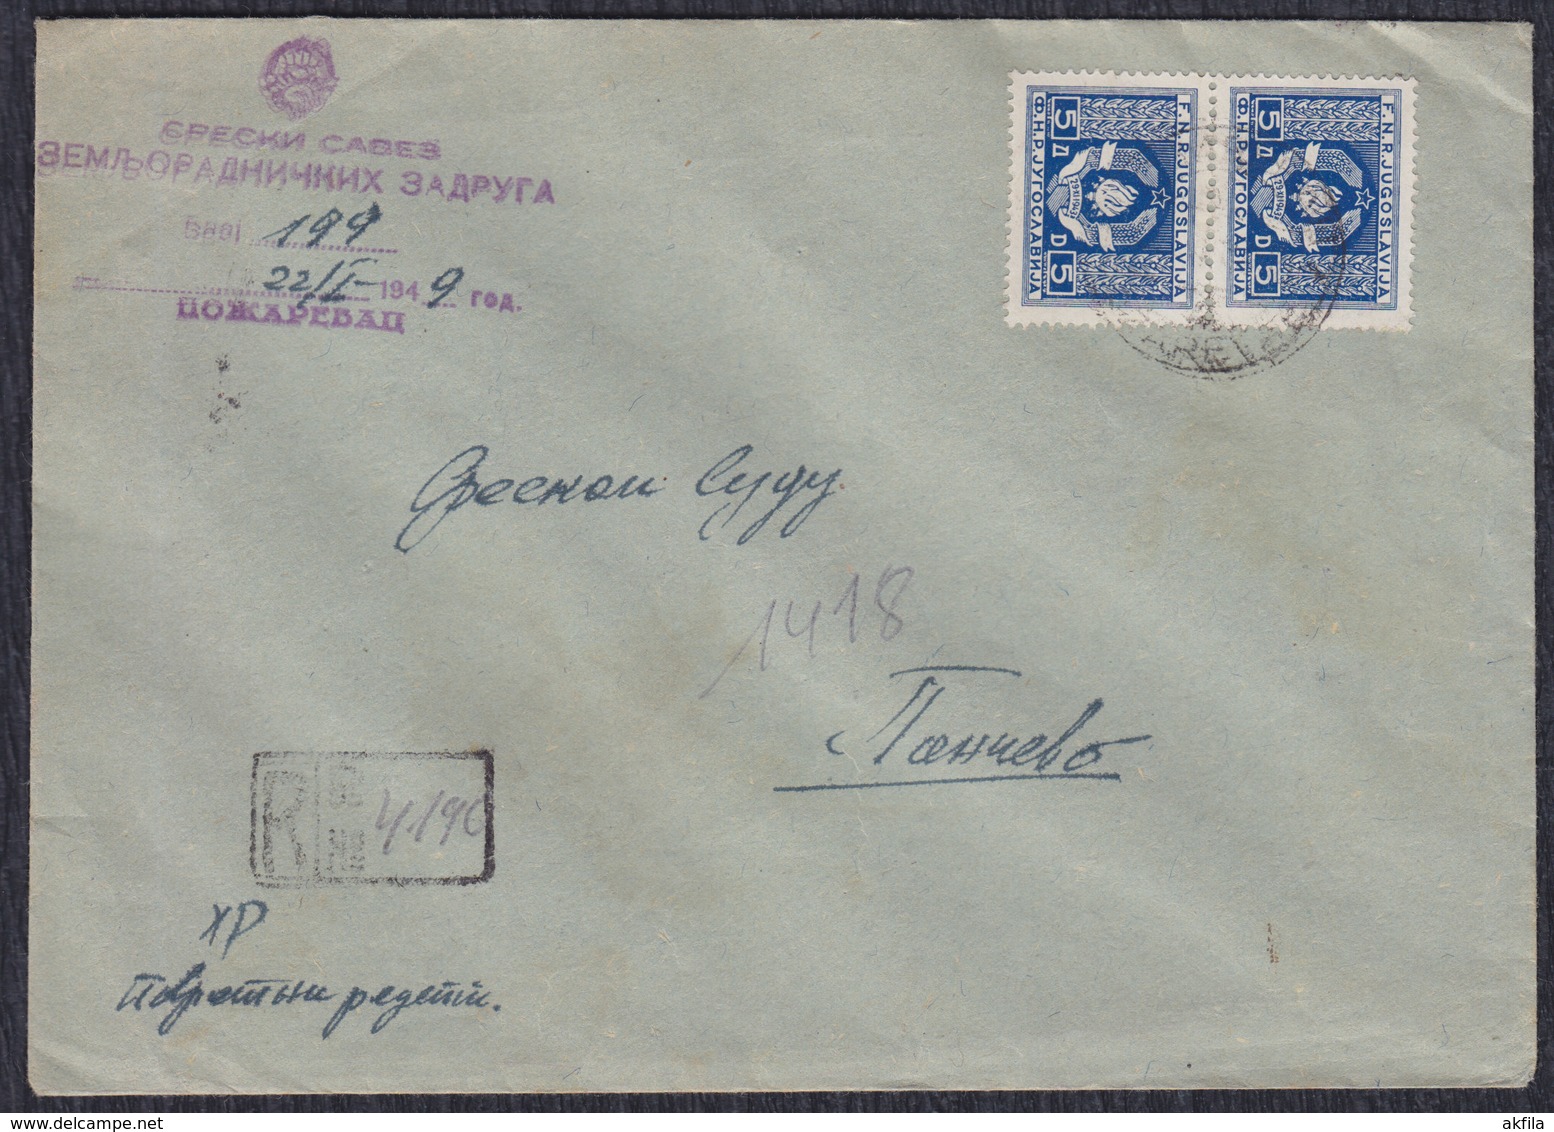 Yugoslavia 1949 R-letter Franked With Official Stamps Sent From Pozarevac To Pancevo - Covers & Documents